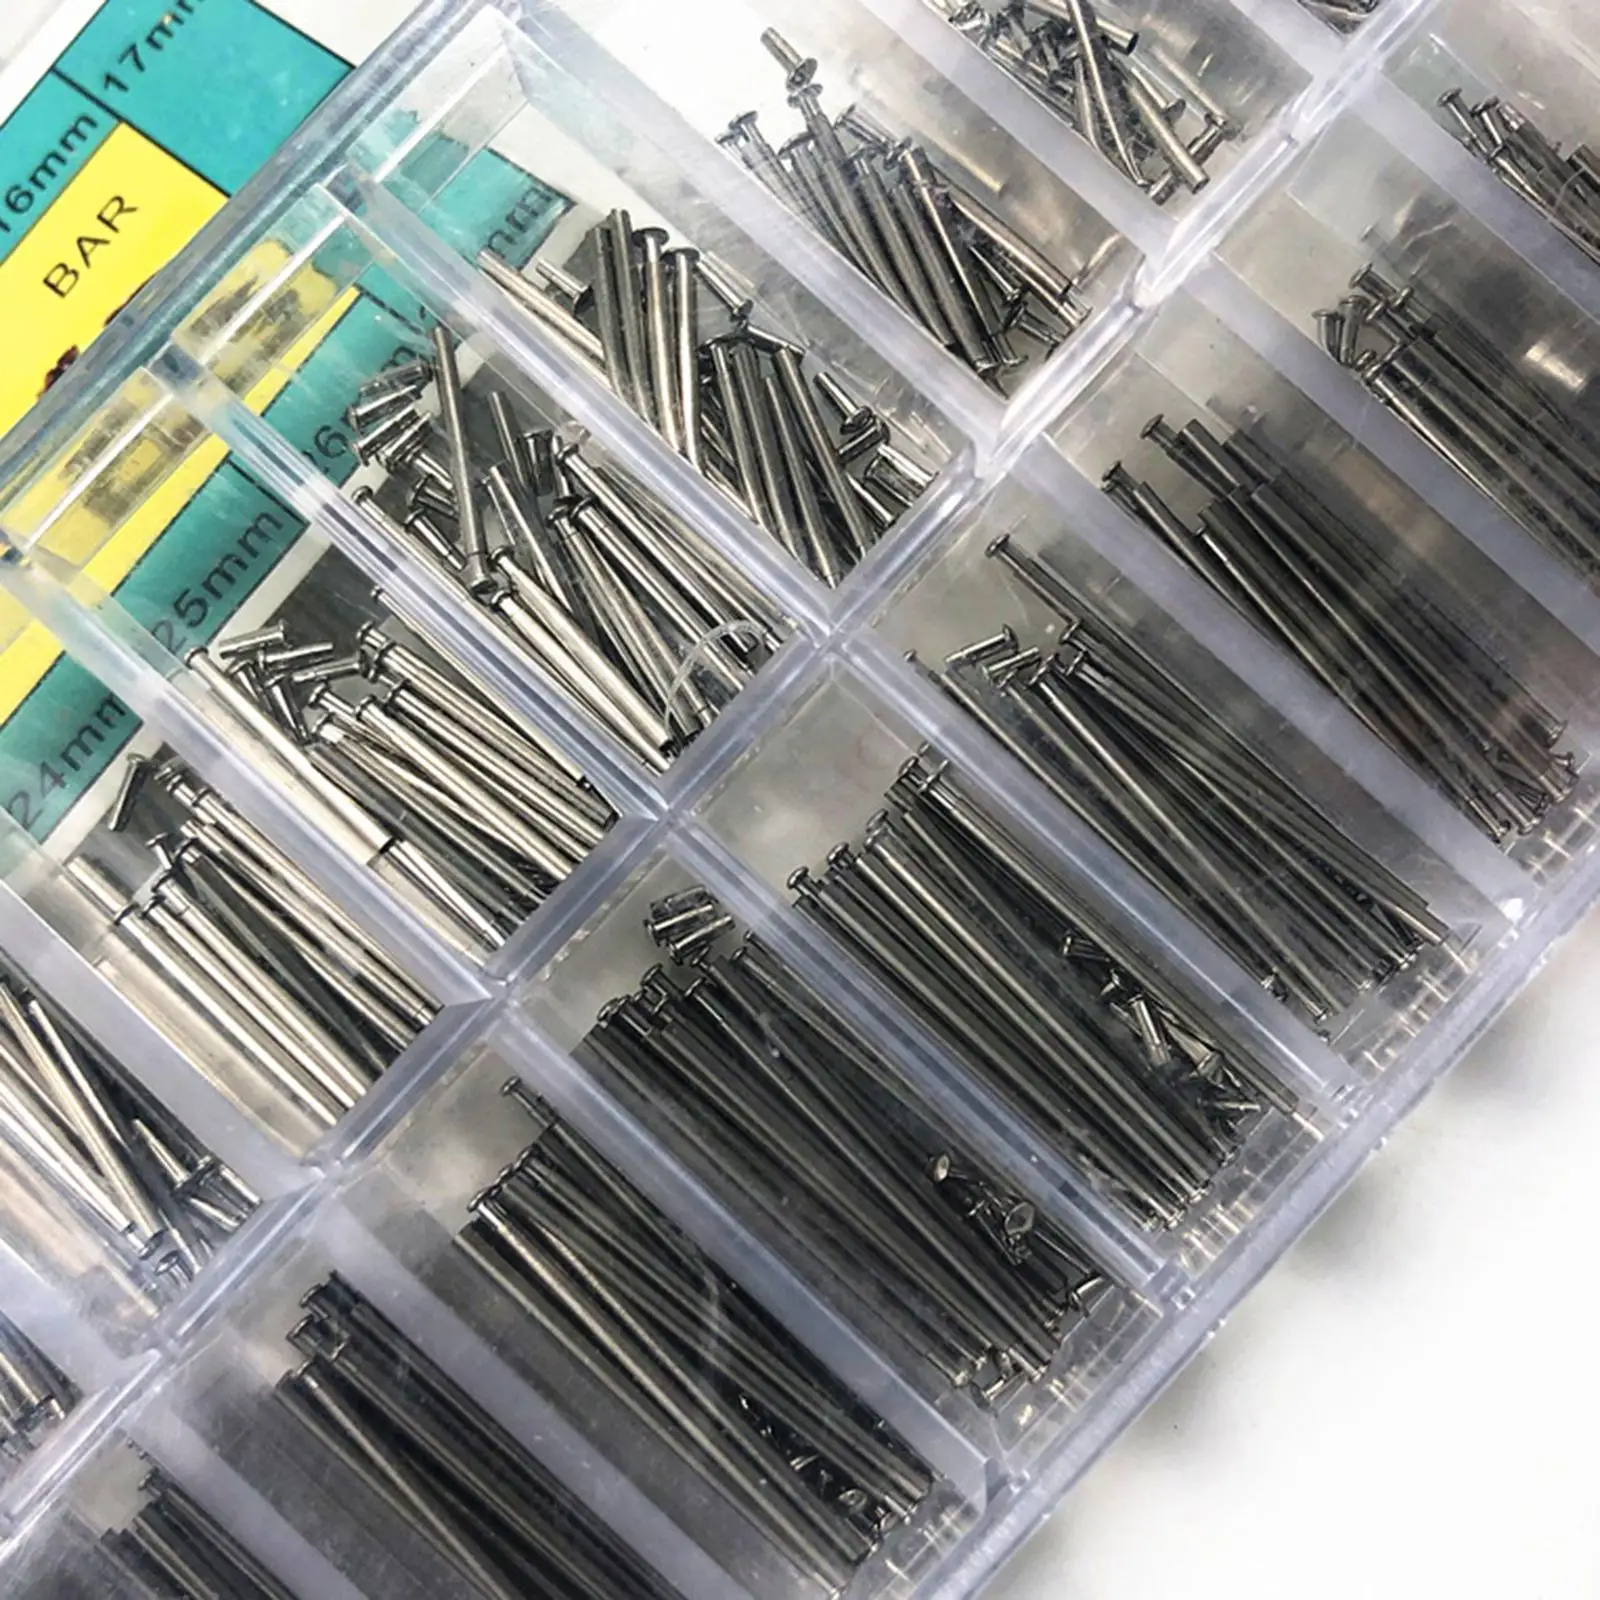 300x Stainless Steel Watch Strap Link Pins Spring Bars 8-27mm Watchmaker Tool Repair 20 Different Sizes Replacement